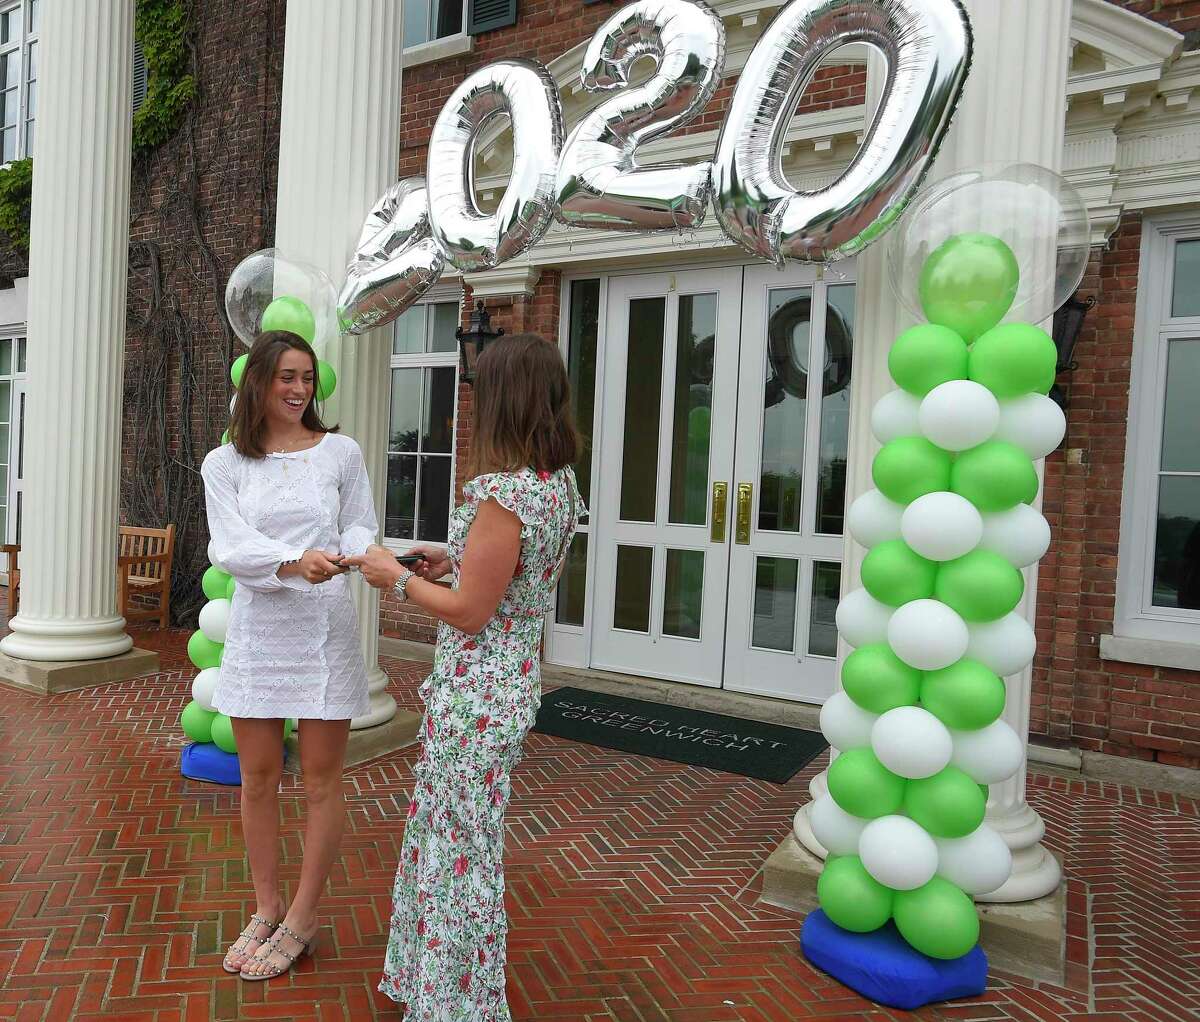 Emma Caruso and her mother Sandra Caruso, a trustee at Sacred Heart Greenwich, pose for a photograph as the Class of 2020 celebrates with a Graduation Parade at the school in Greenwich, Connecticut on June 5, 2020. Each Senior was presented with their diplomas and had a photograph taken with a celebratory display in front of the school's Salisbury Hall. After distance learning to close the year due to the coronavirus, Greenwich’s private schools have set Sept. 8 to reopen with flexible plans to try and get students back on campus if it is safe.